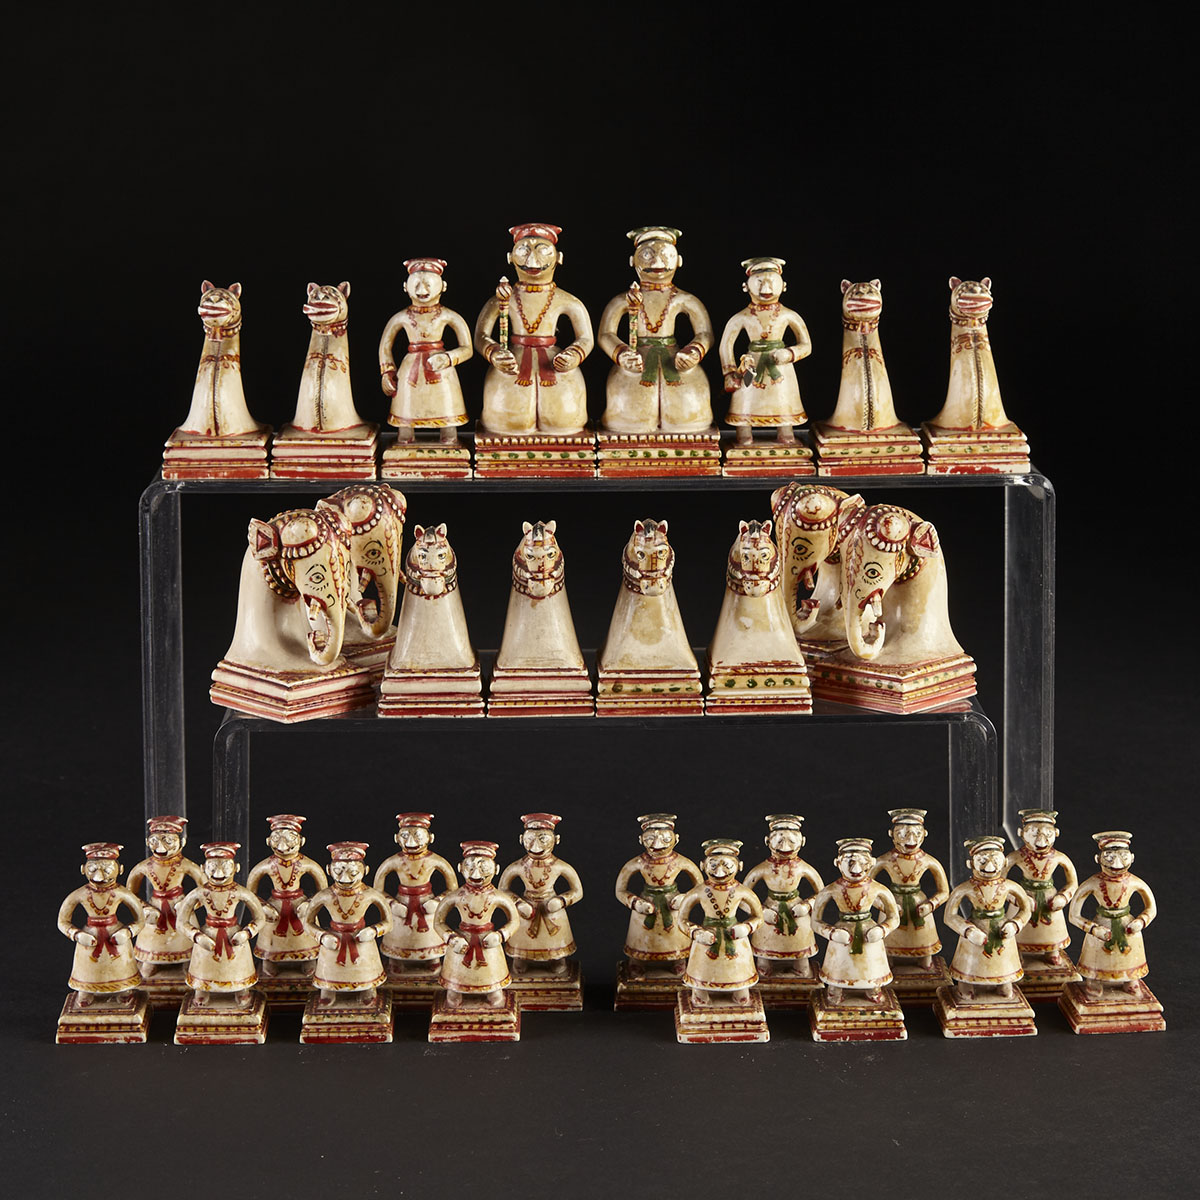 Mughal Carved and Polychromed Figural Chess Set, Rajasthan, early 19th century